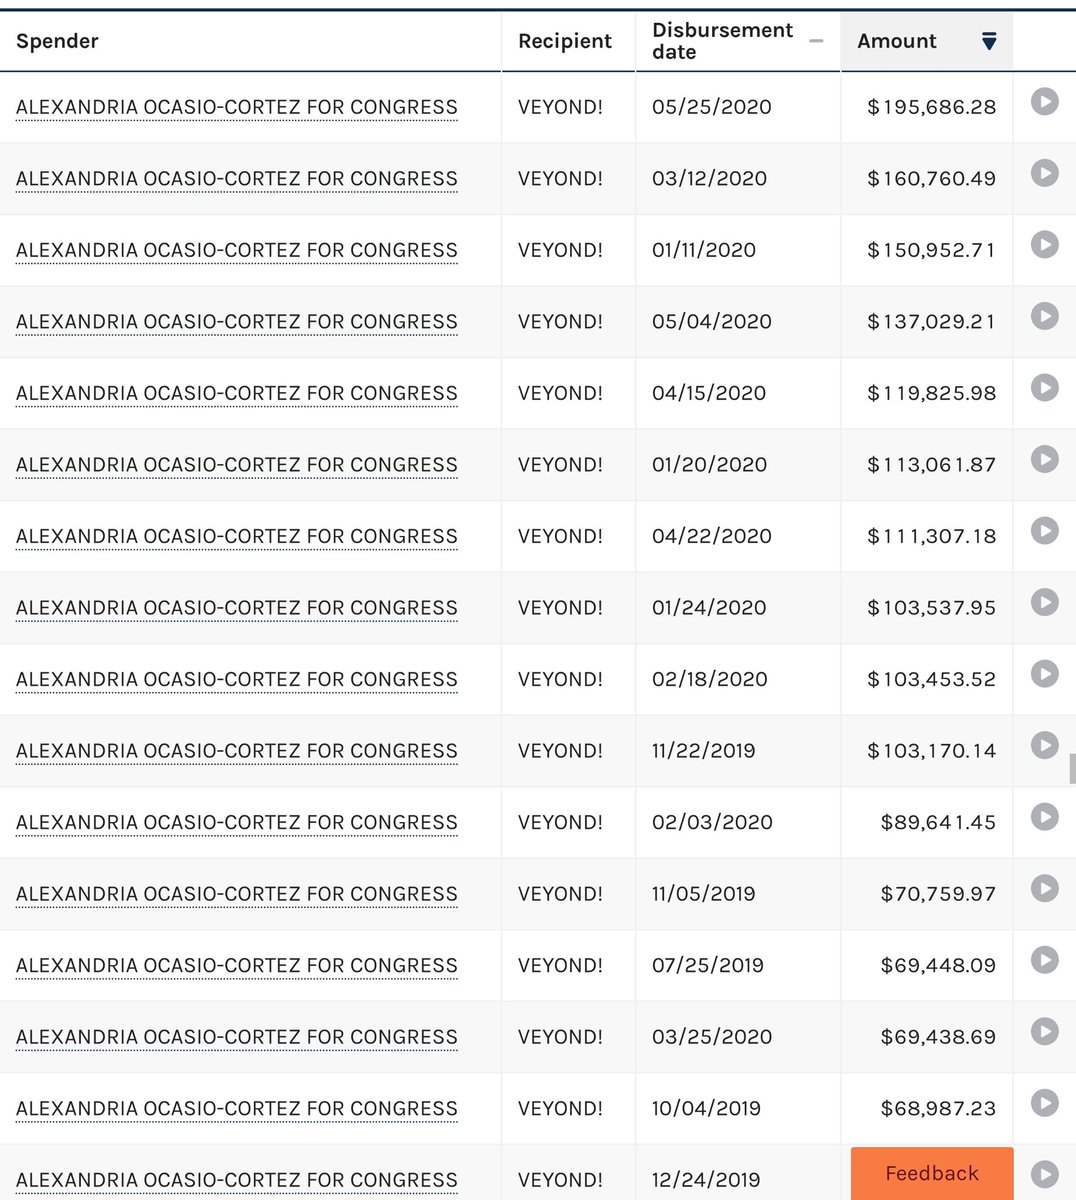 Her top recipient is something called "VEYOND!", which has received ~$2.5M from AOC so far this cycle.These are some large payments. The memo simply describes the largest one as "card payment"...